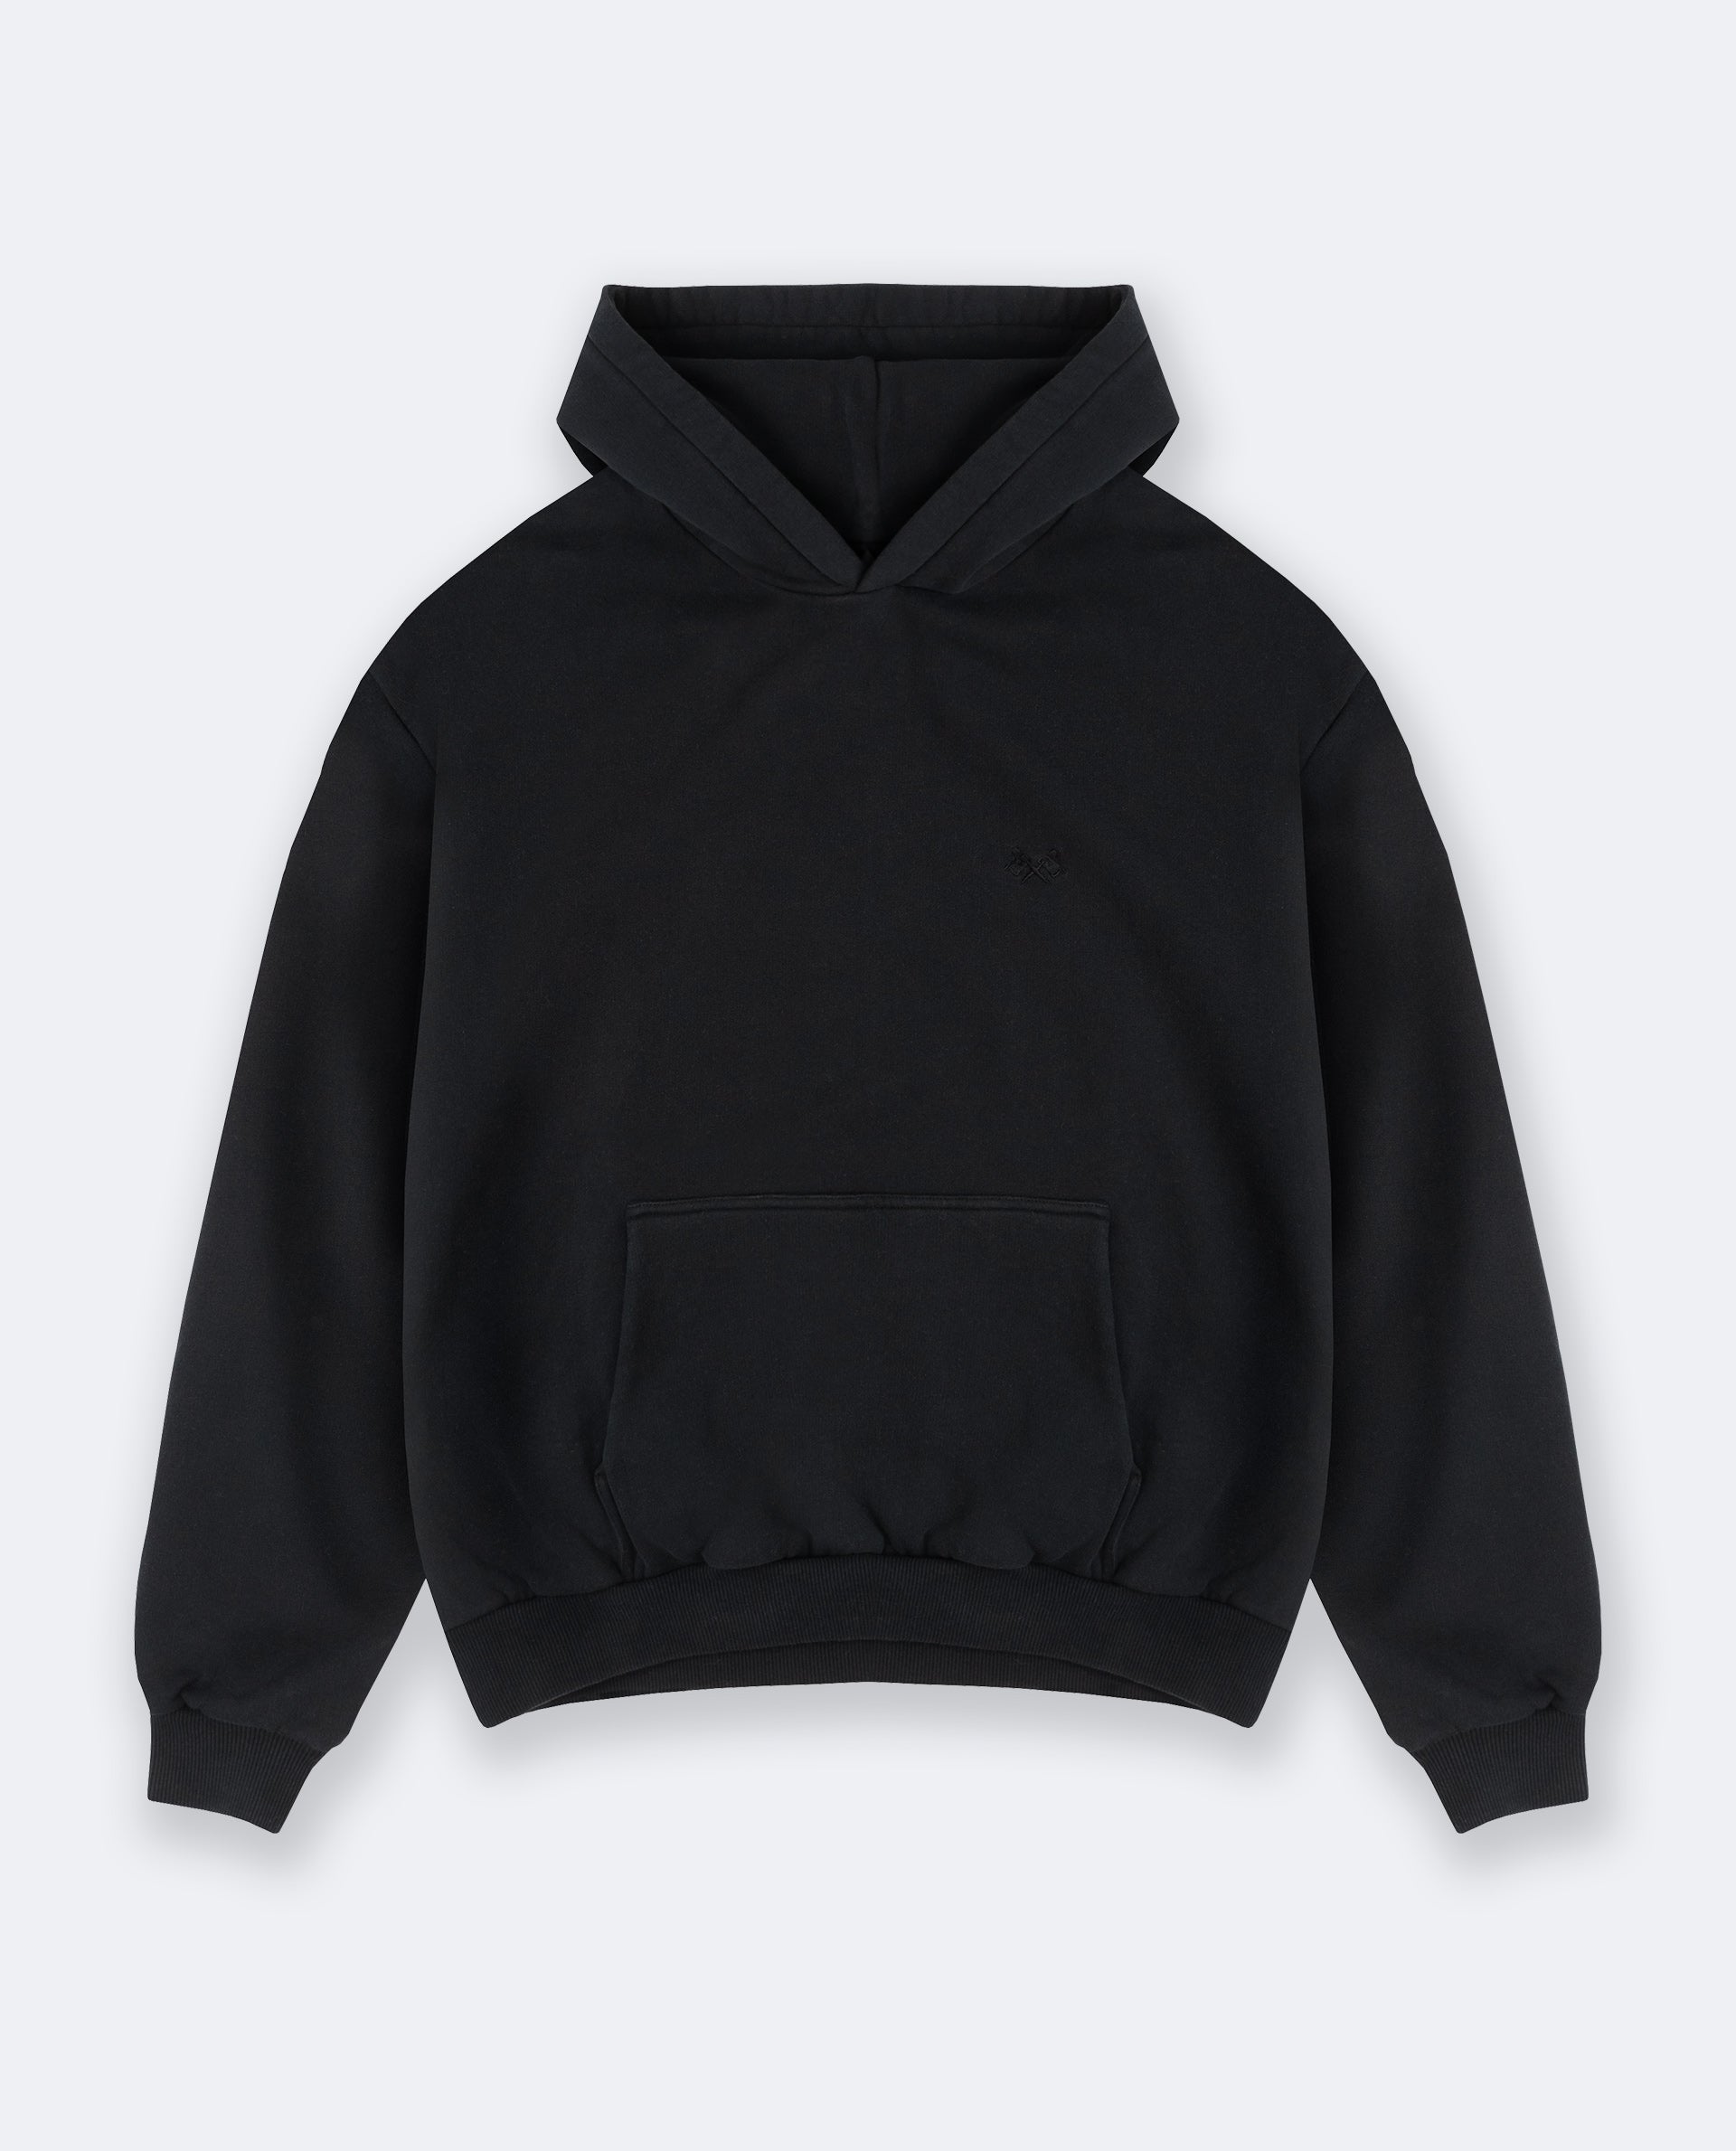 *PHASE 2* Root Stretch Limo Double Layer Hoodie